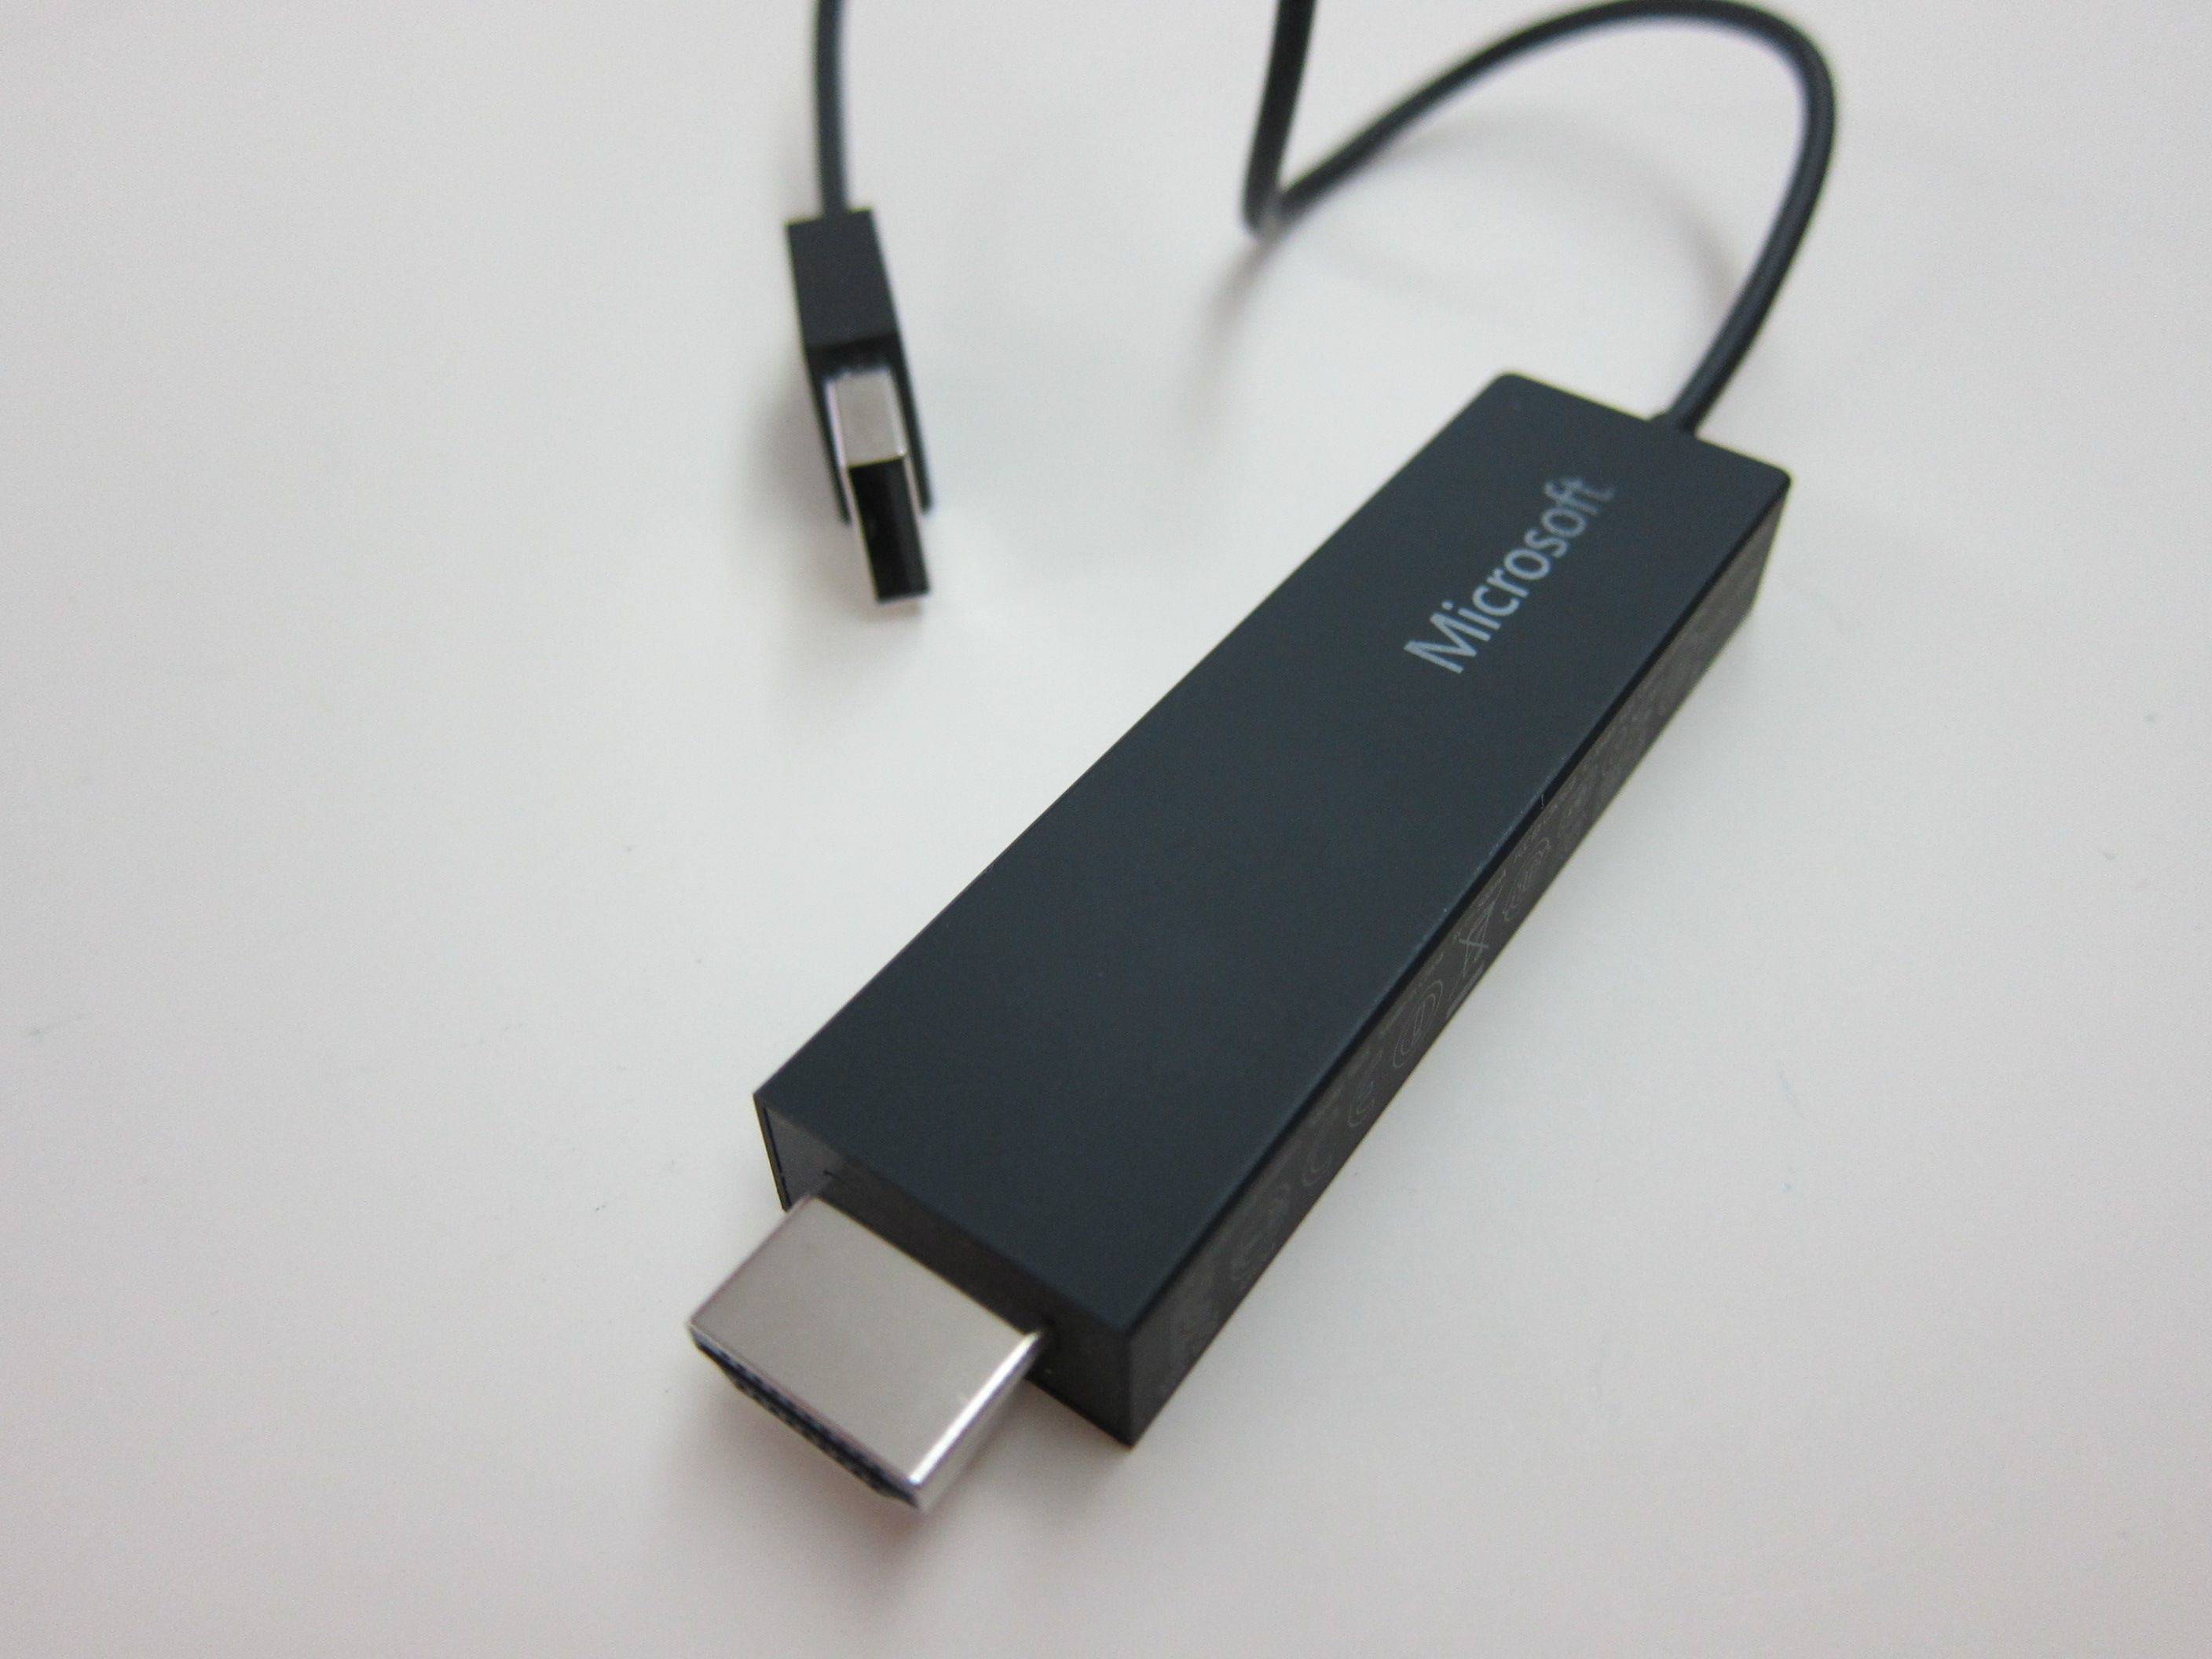 Microsoft Wireless Display Adapter Review « Blog